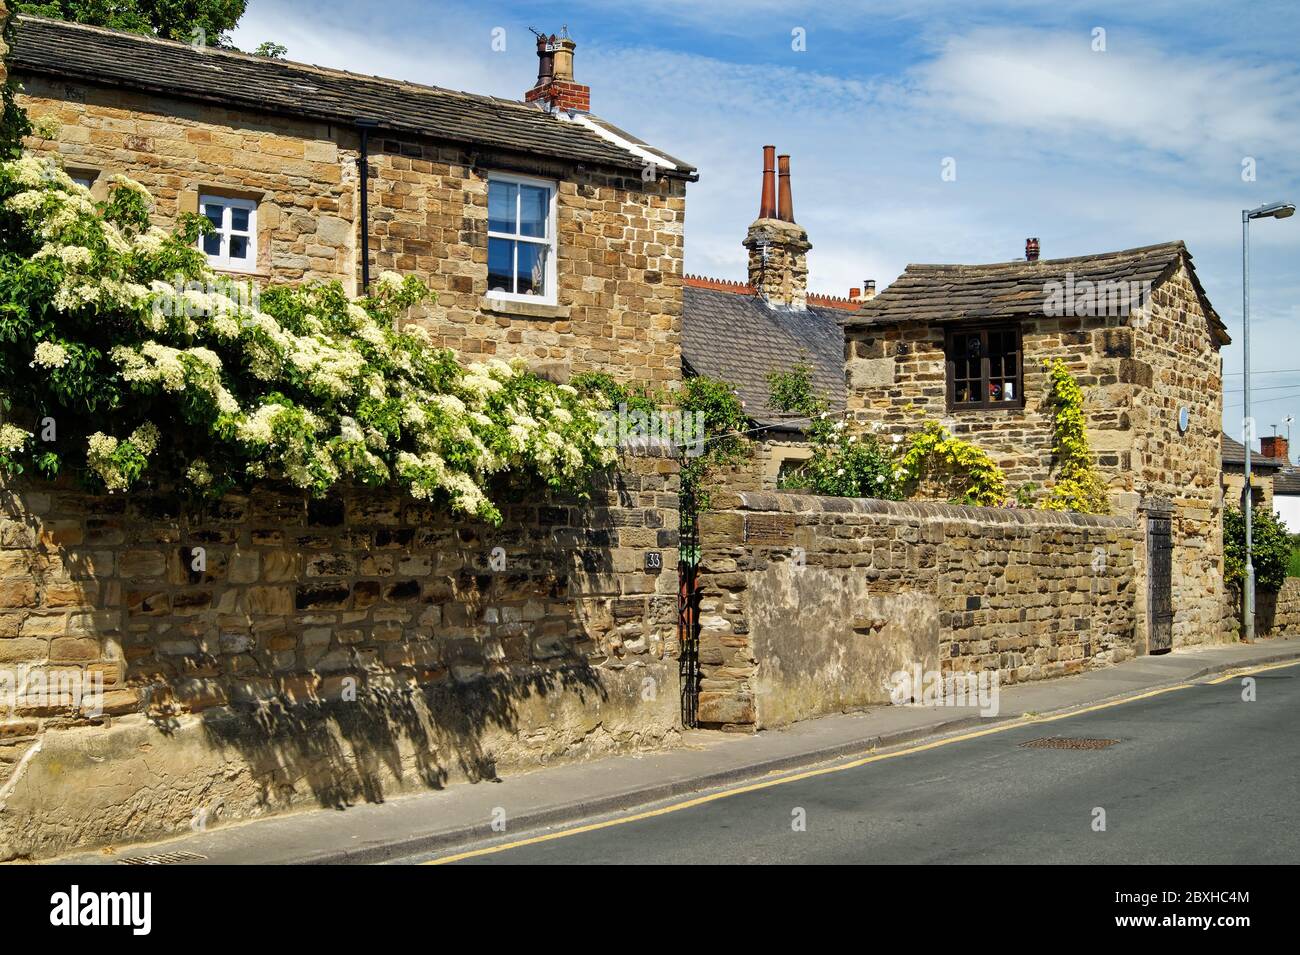 UK,West Yorkshire,Wakefield,Horbury,Tithe Barn Street,Kidcote or Old Lock Up Building and Cottage Stock Photo